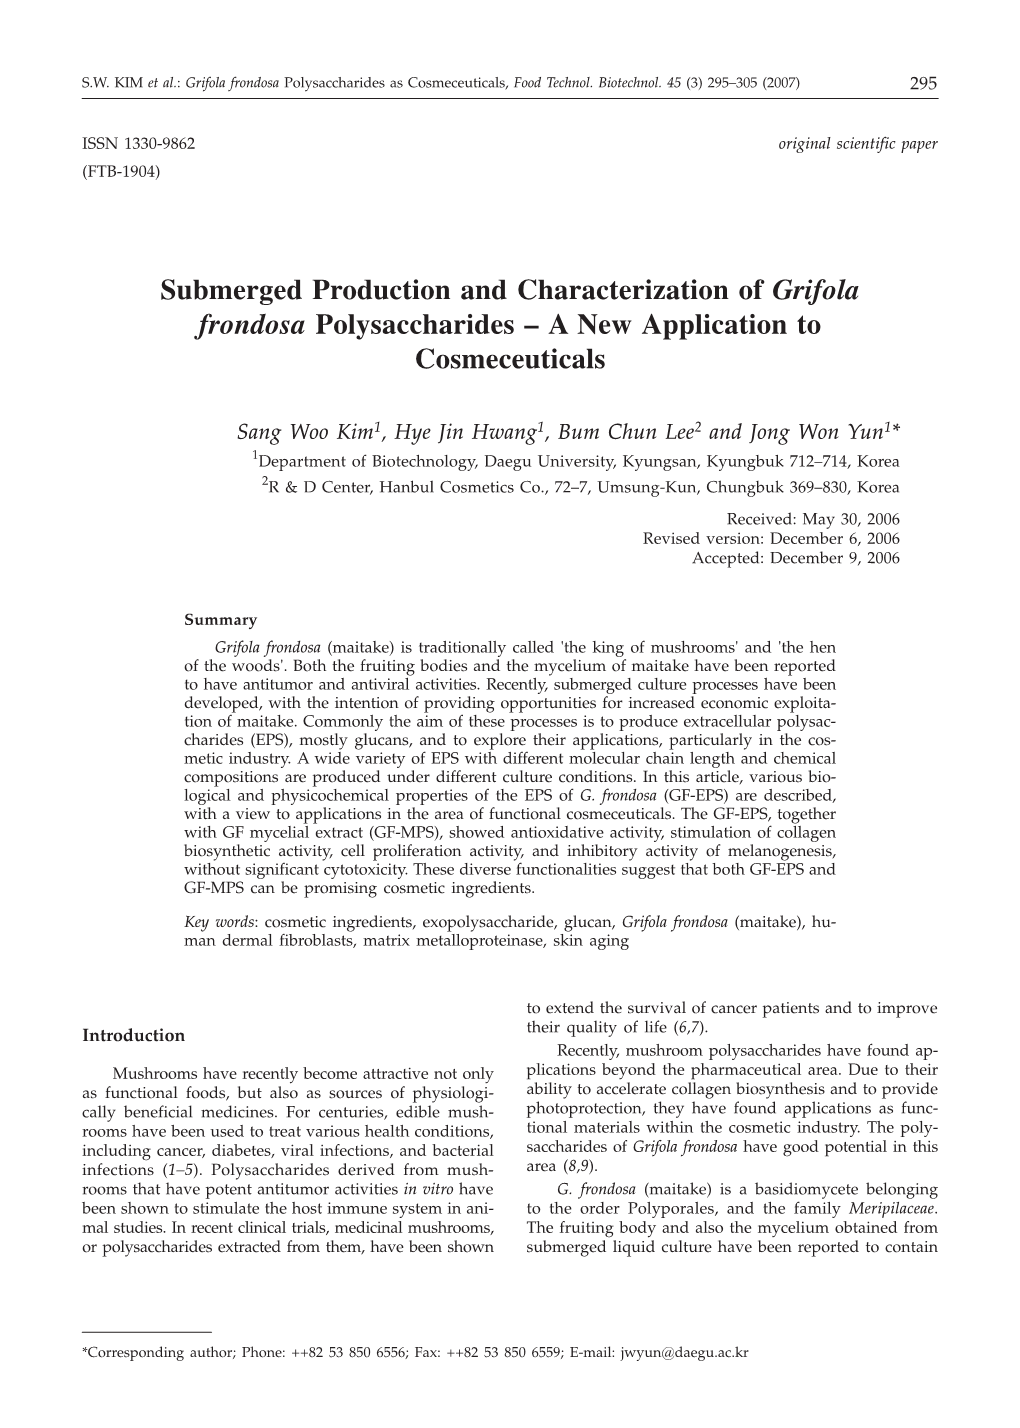 Submerged Production and Characterization of Grifola Frondosa Polysaccharides – a New Application to Cosmeceuticals